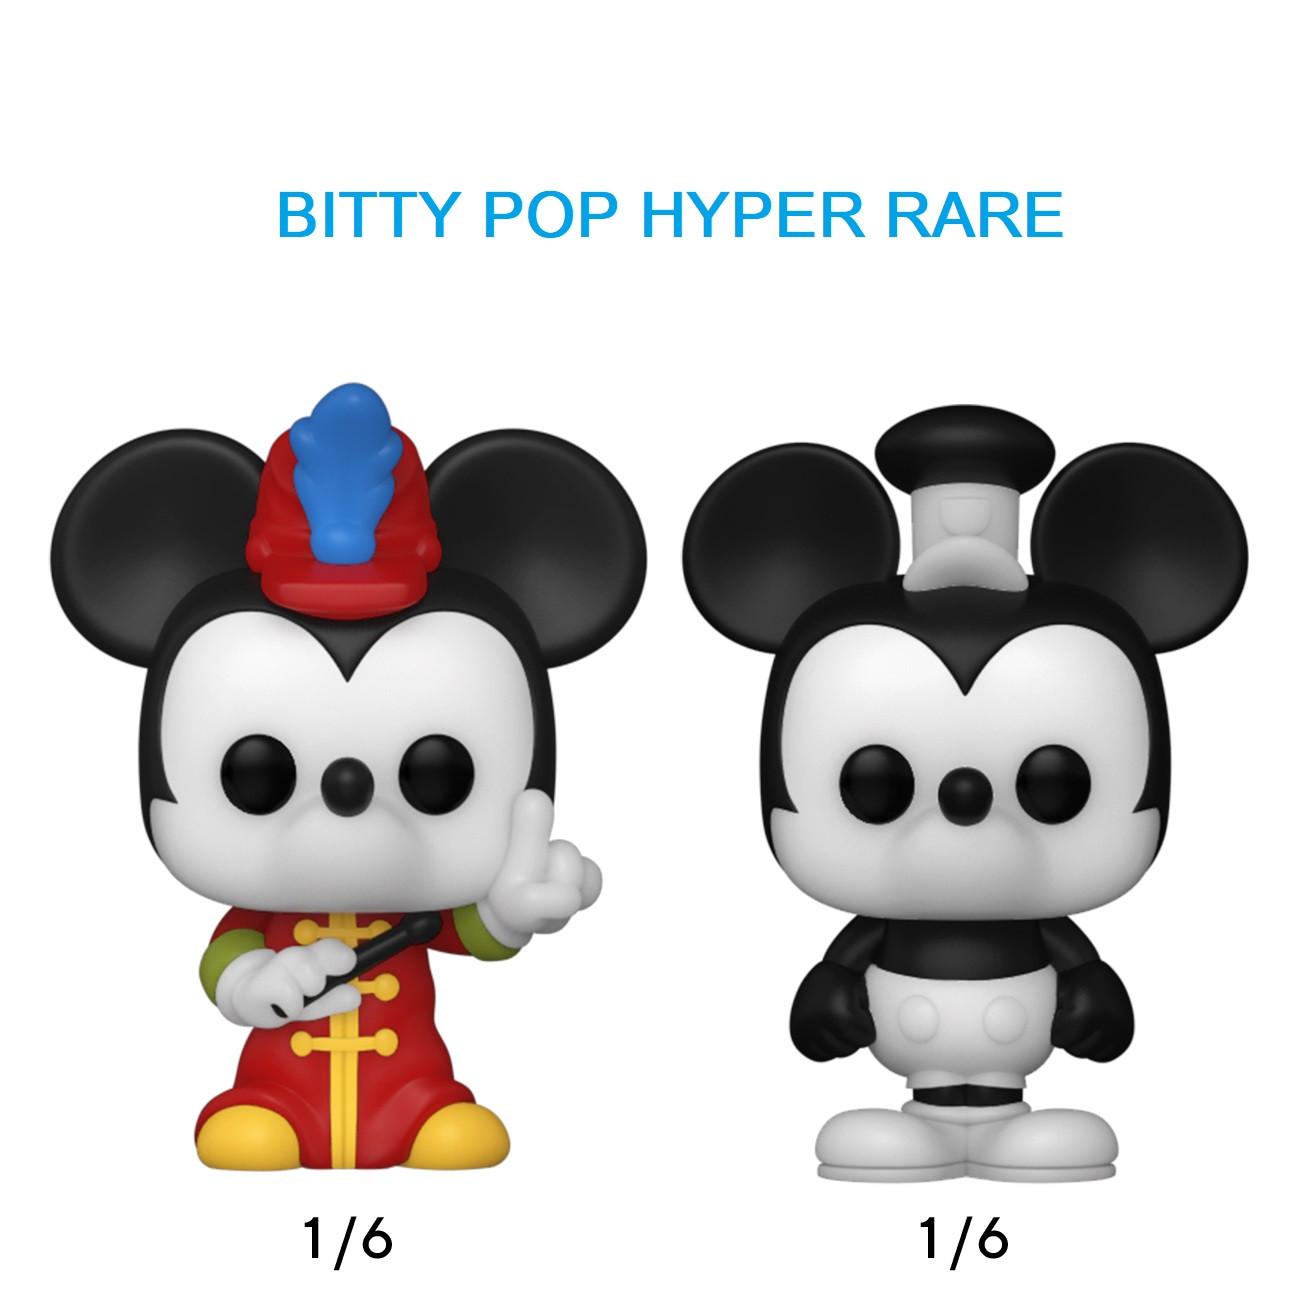 Funko  POP - Bitty - Mickey & Cie - 4 Pack - Mickey Mouse 